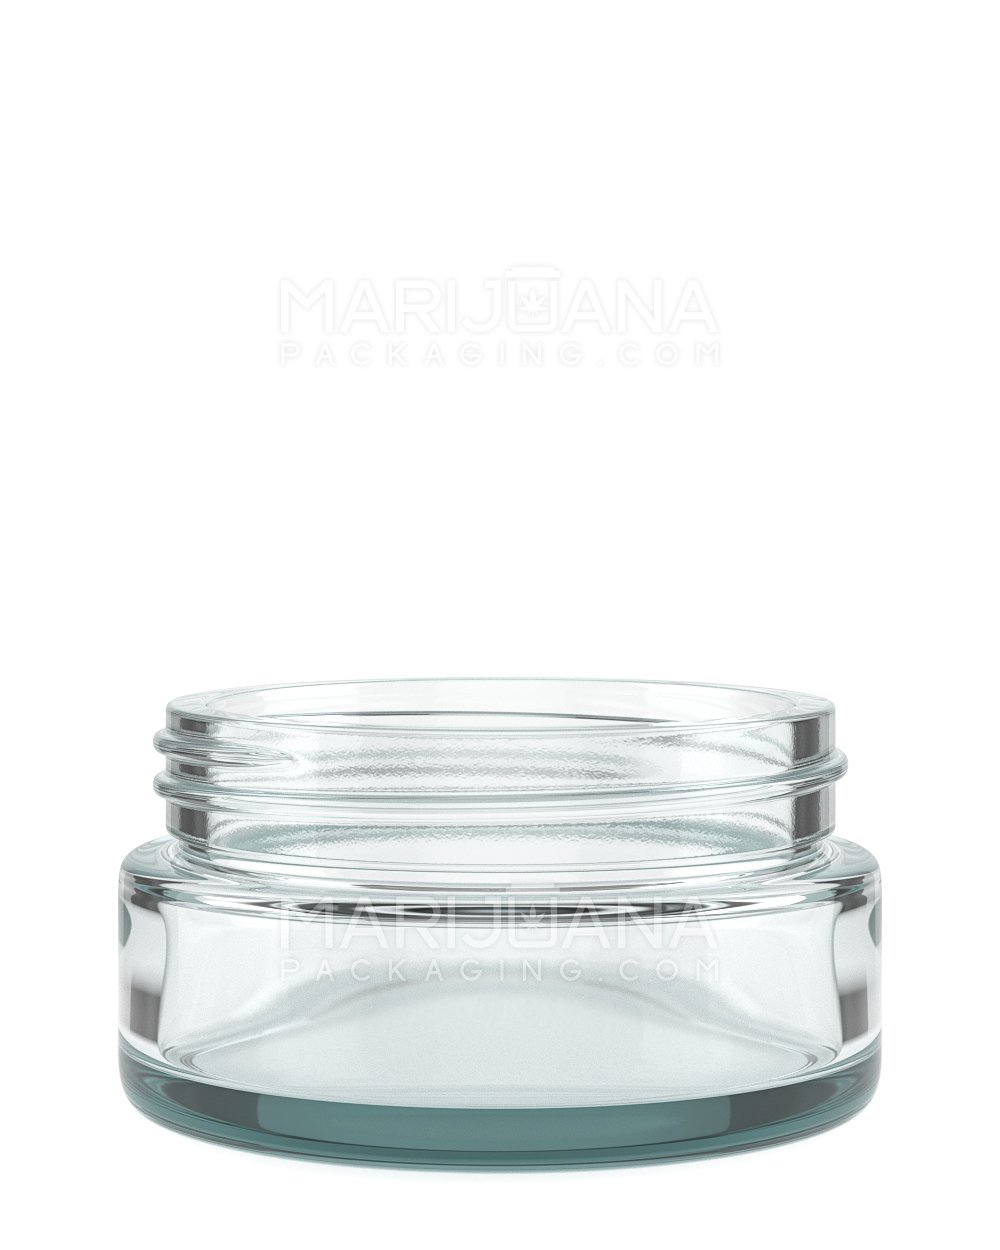 Straight Sided Clear Glass Jars | 63mm - 1.7oz | Sample - 1